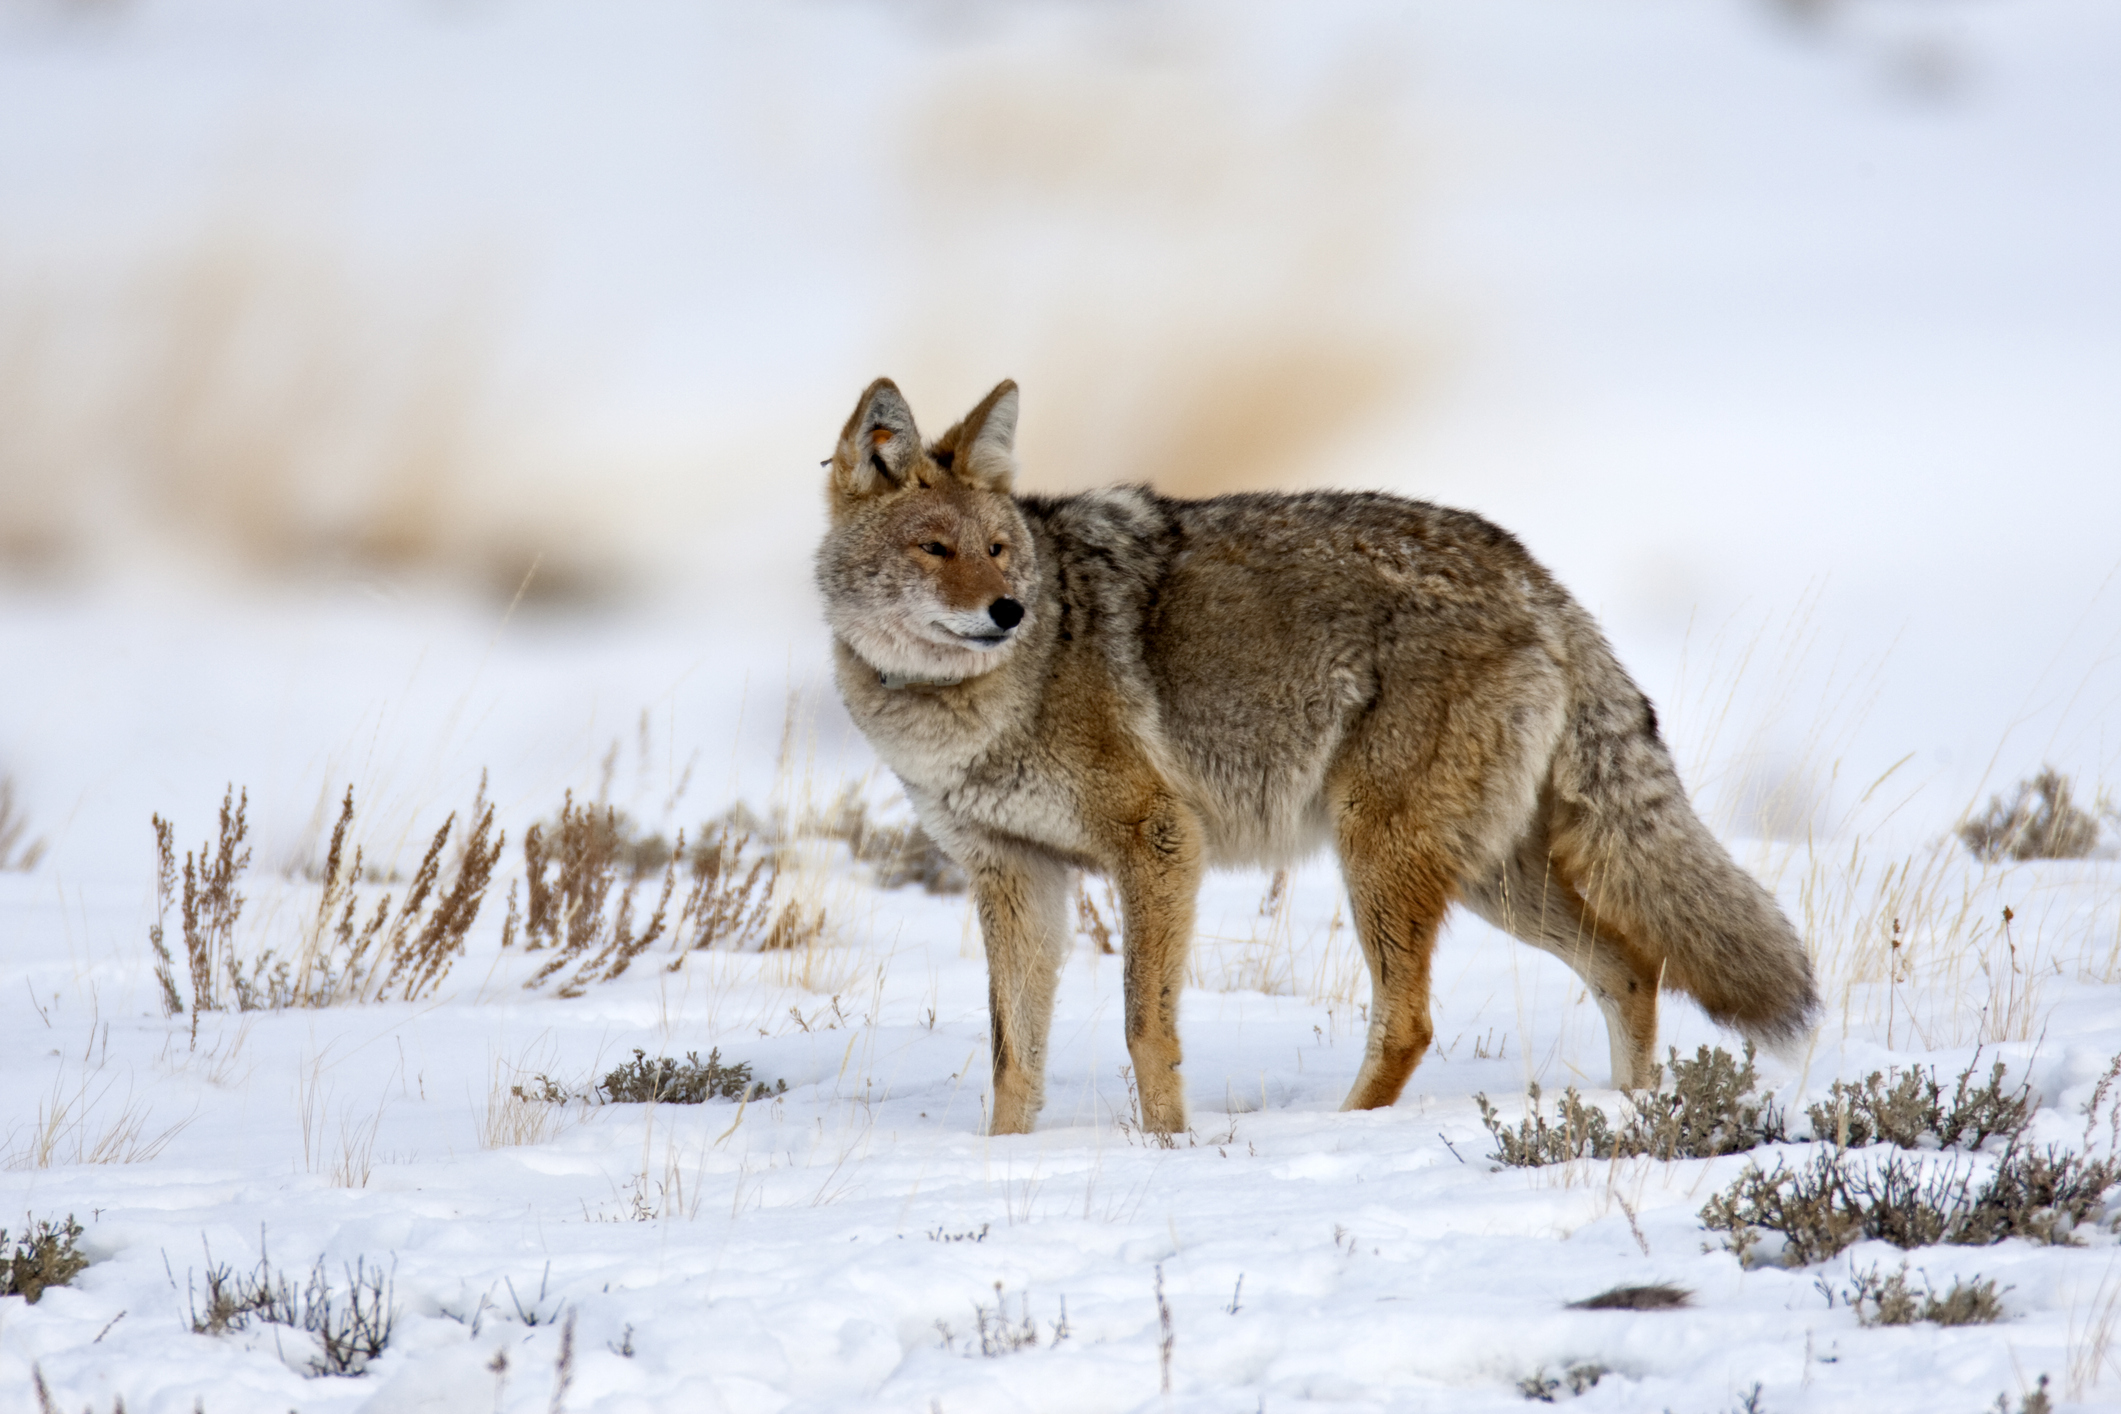 A Coyote in Yellowstone National Park in 2009. (Getty Images)